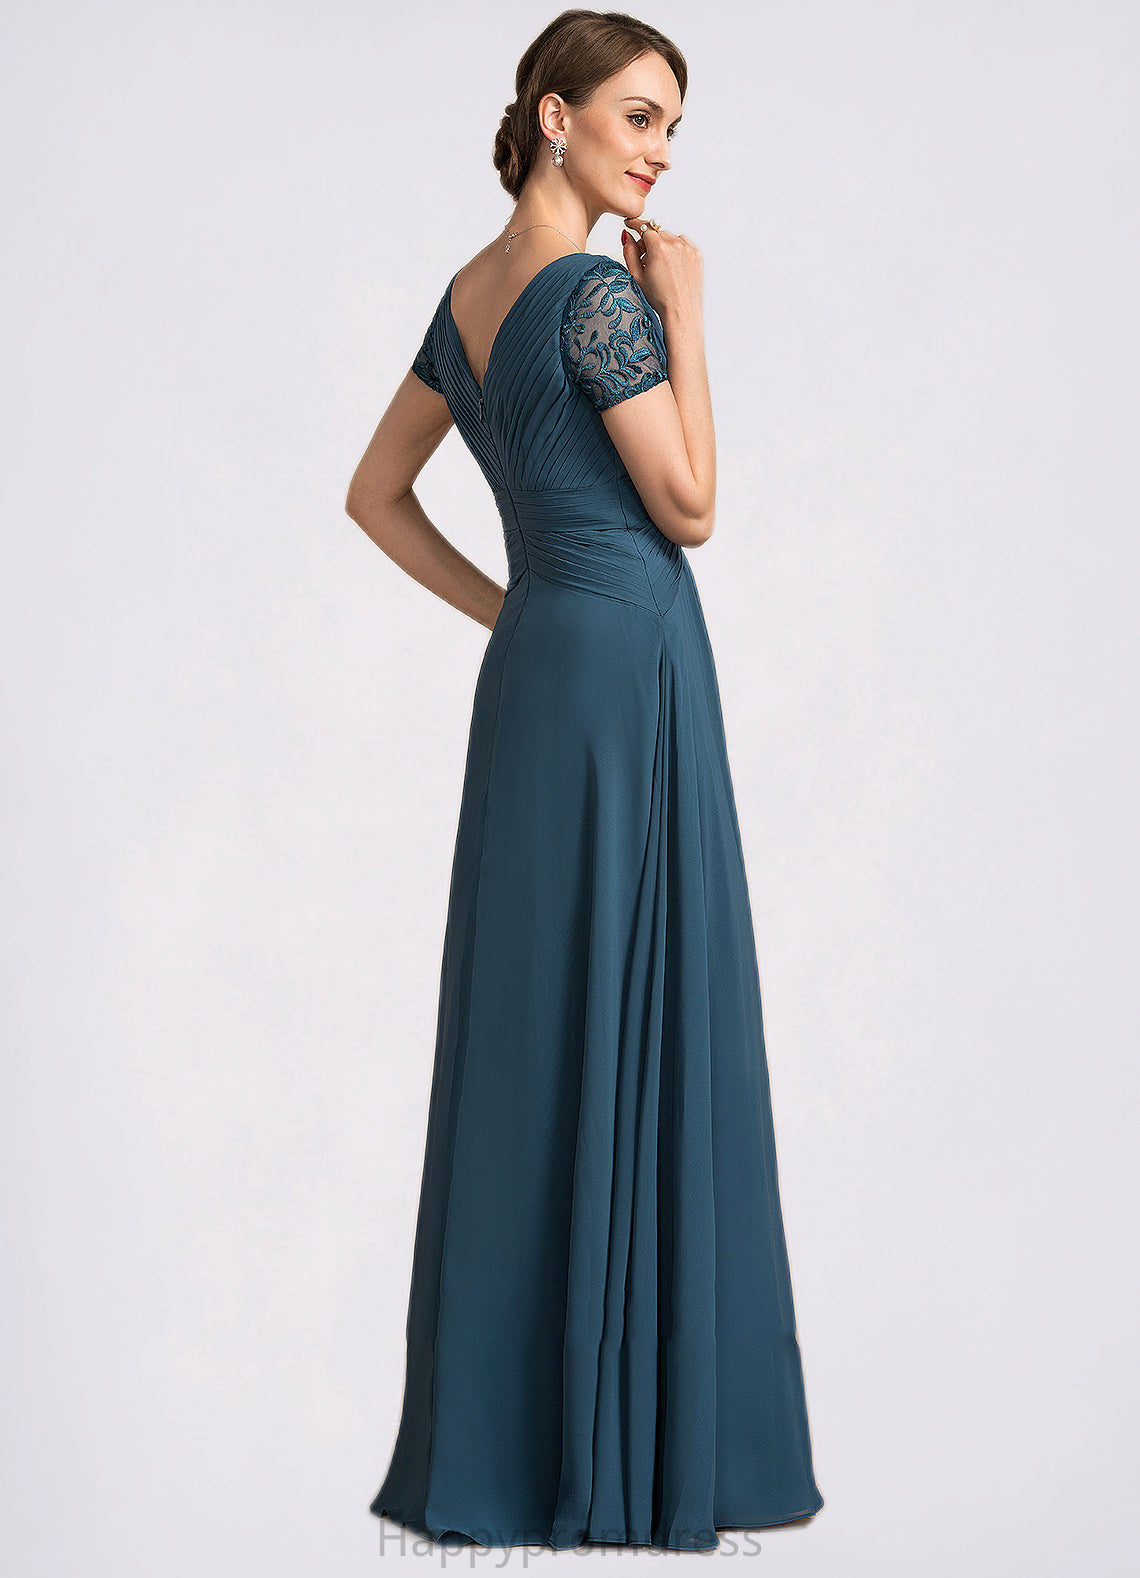 Peyton A-Line V-neck Floor-Length Chiffon Mother of the Bride Dress With Lace XXS126P0014713